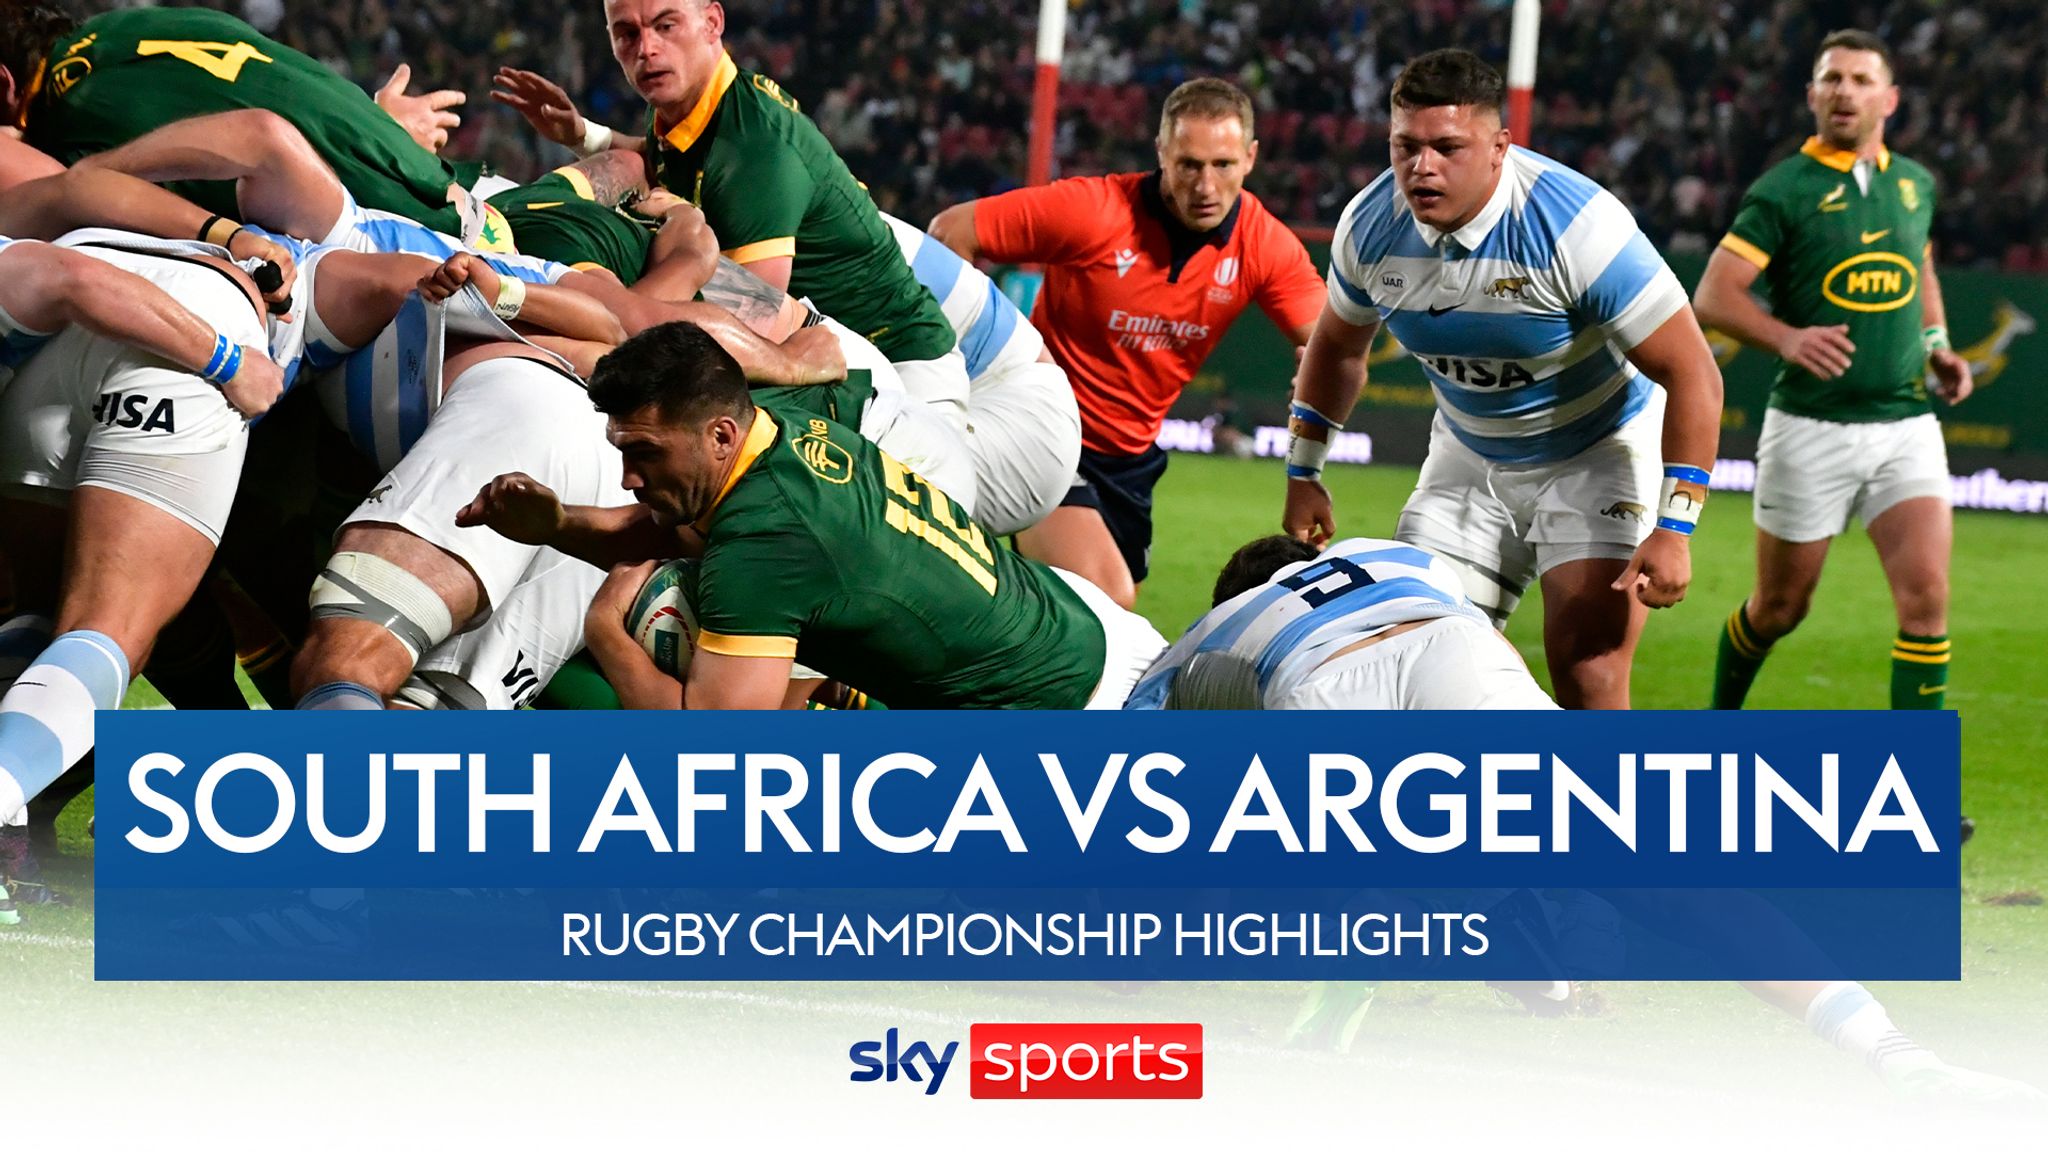 South Africa 22-21 Argentina Rugby Championship highlights Video Watch TV Show Sky Sports